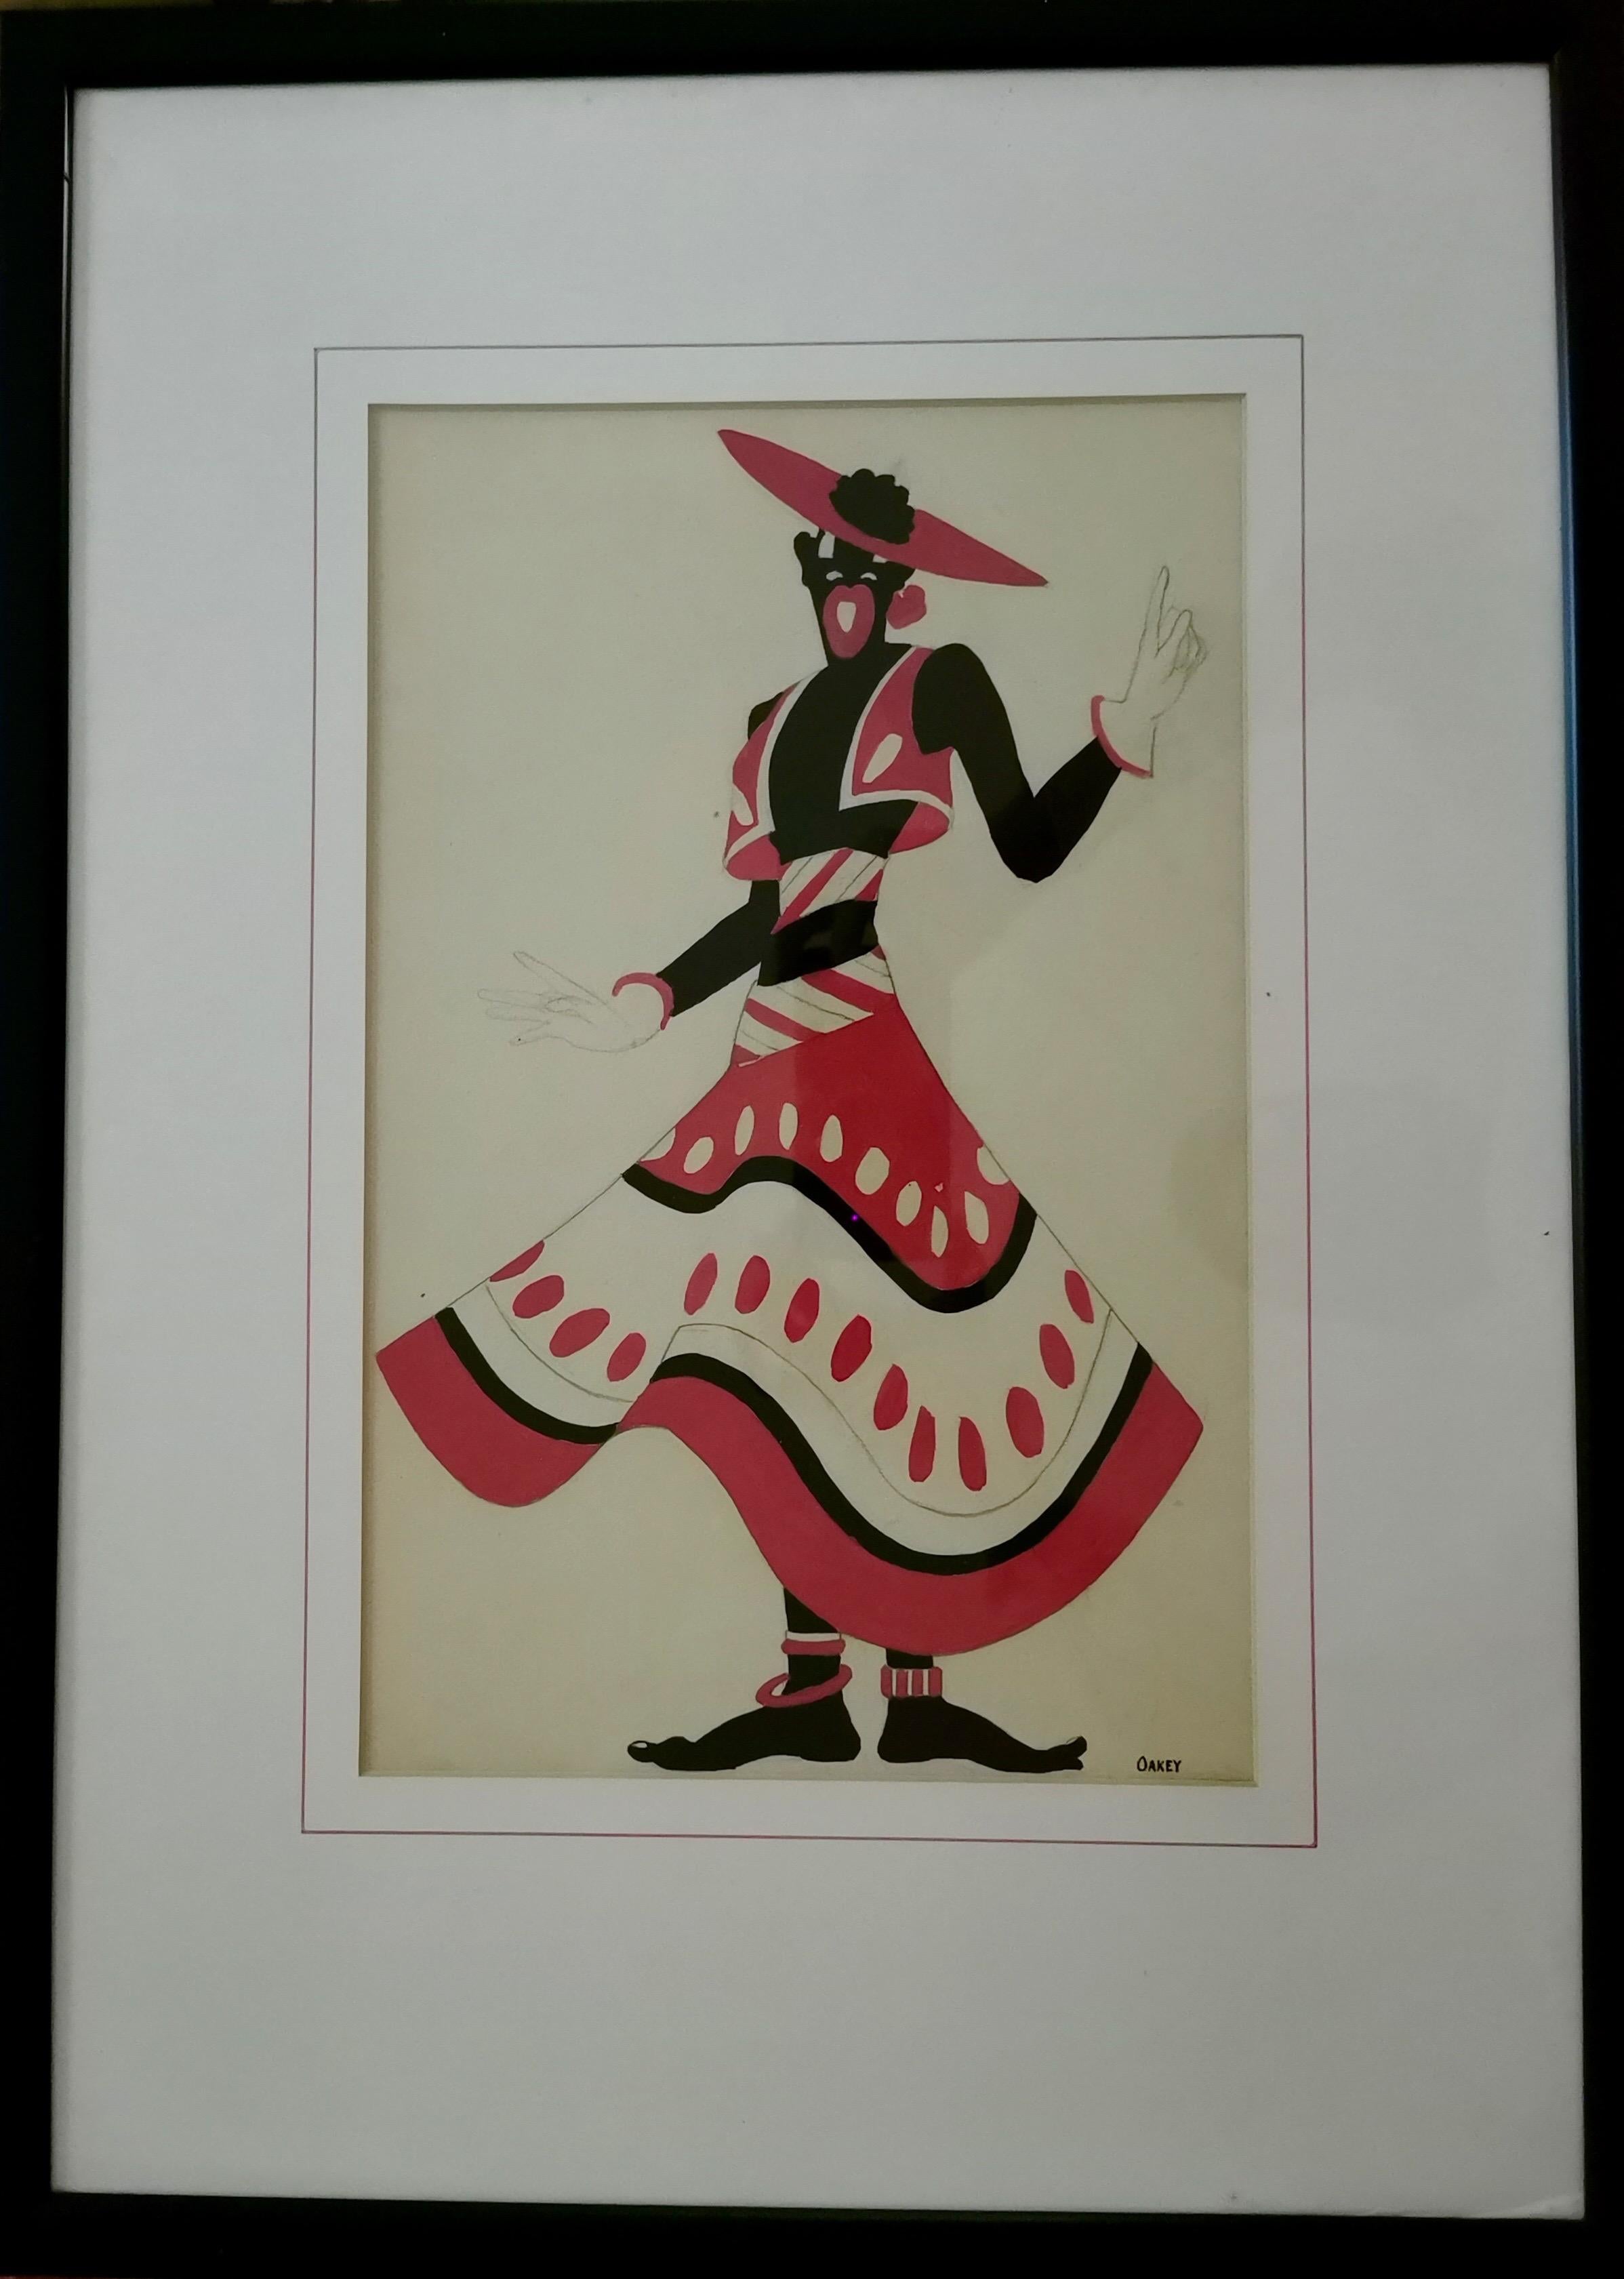 Two Framed Period Fashion Illustrations
Depicting Black Fashion 1960s/1970s
Pencil and Gouache
Signed Oakey
Frame Size 24 inch x 17.5 inch
Image Size 14 inch x 9.25 inch